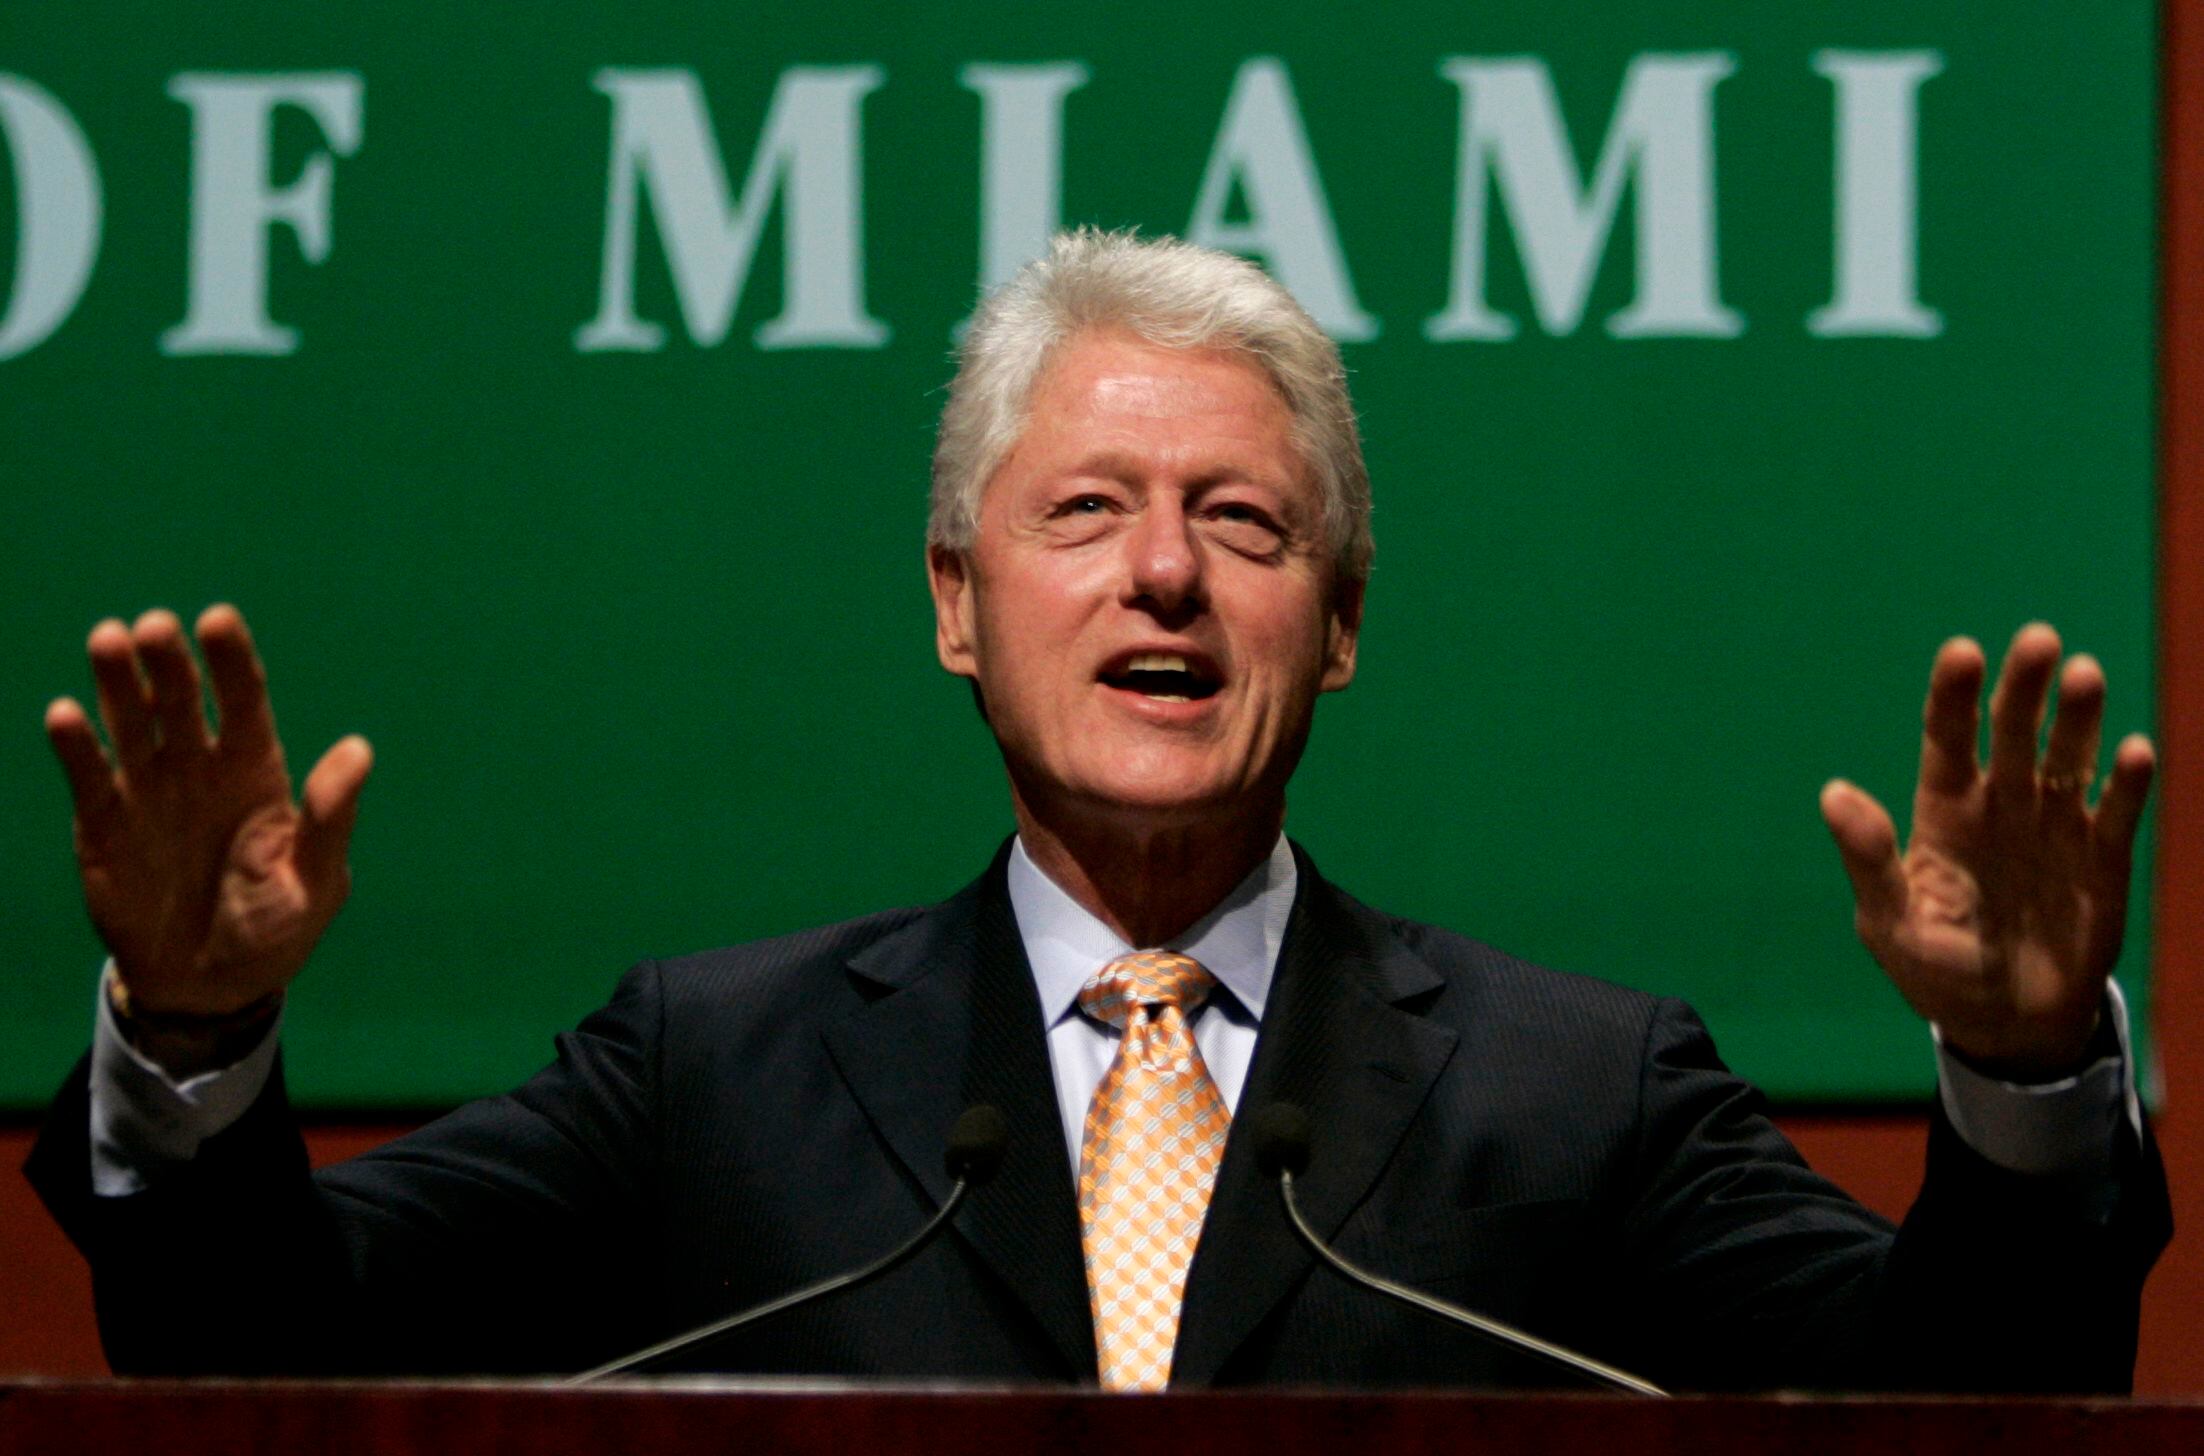 Former President Bill Clinton speaks to graduating students at the University of Miami in Coral Gables, Fla., Thursday, March 1, 2007. (AP Photo/Lynne Sladky)